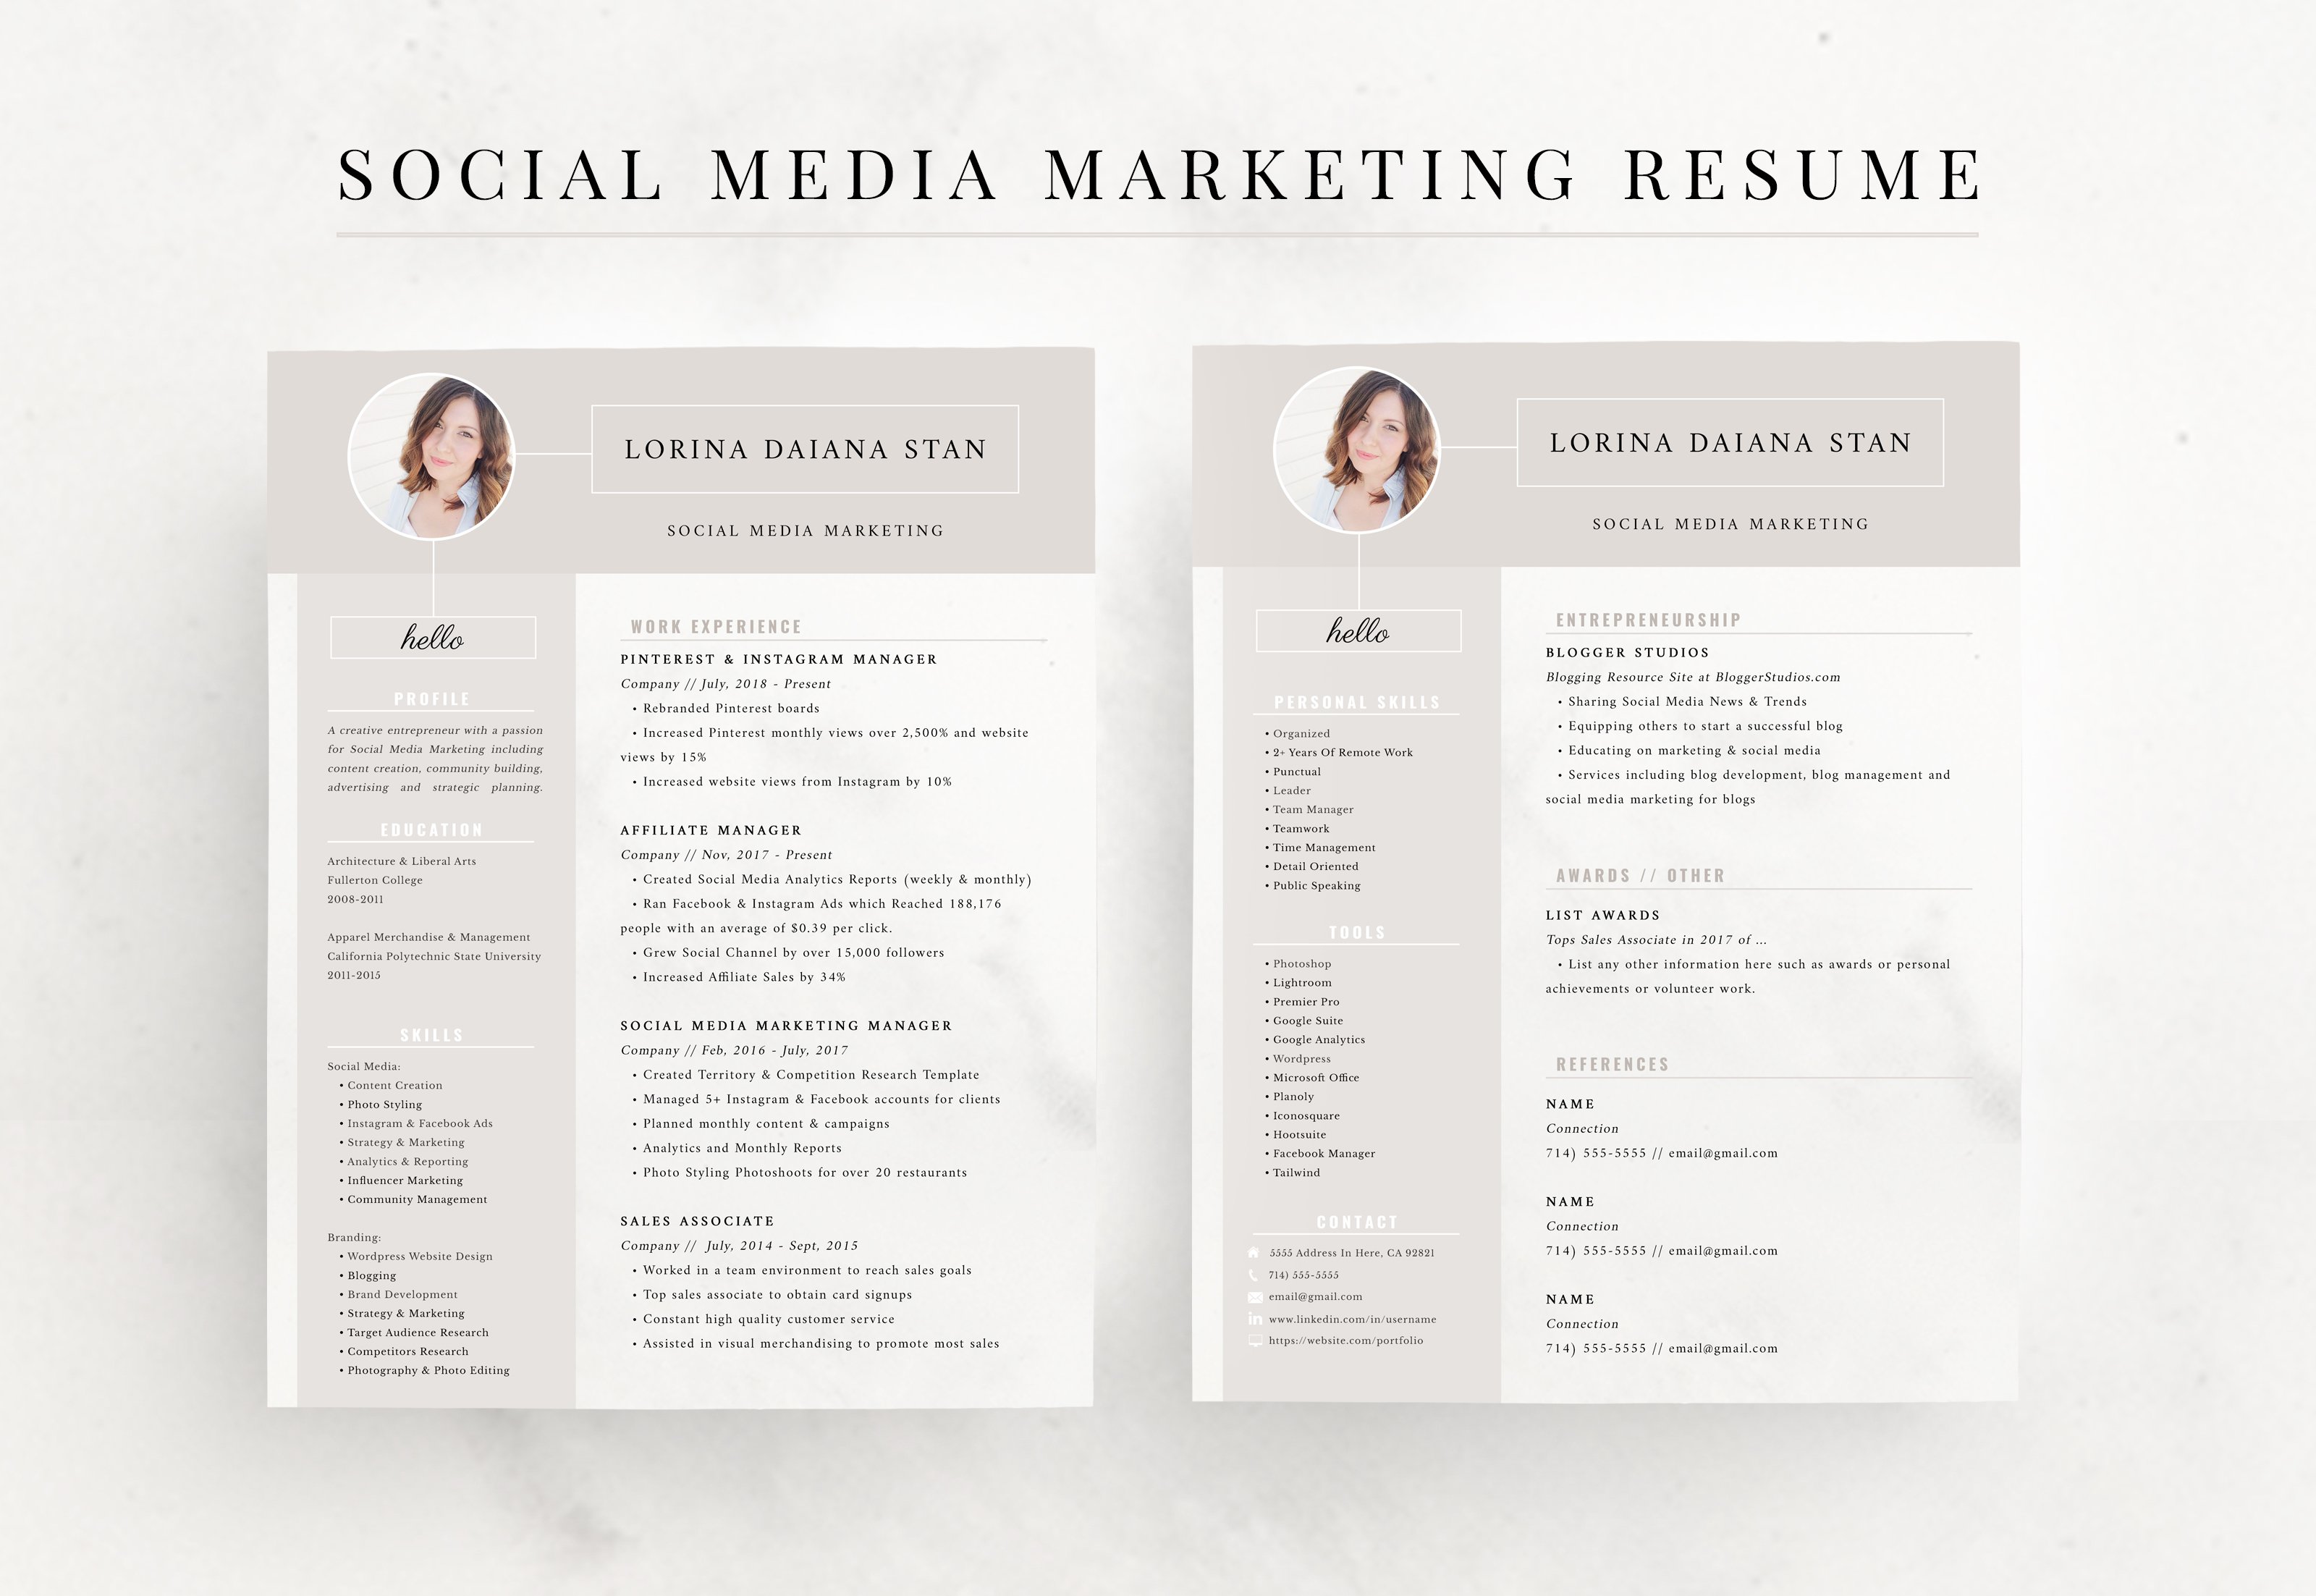 blogger studios resume marketing both pages 506